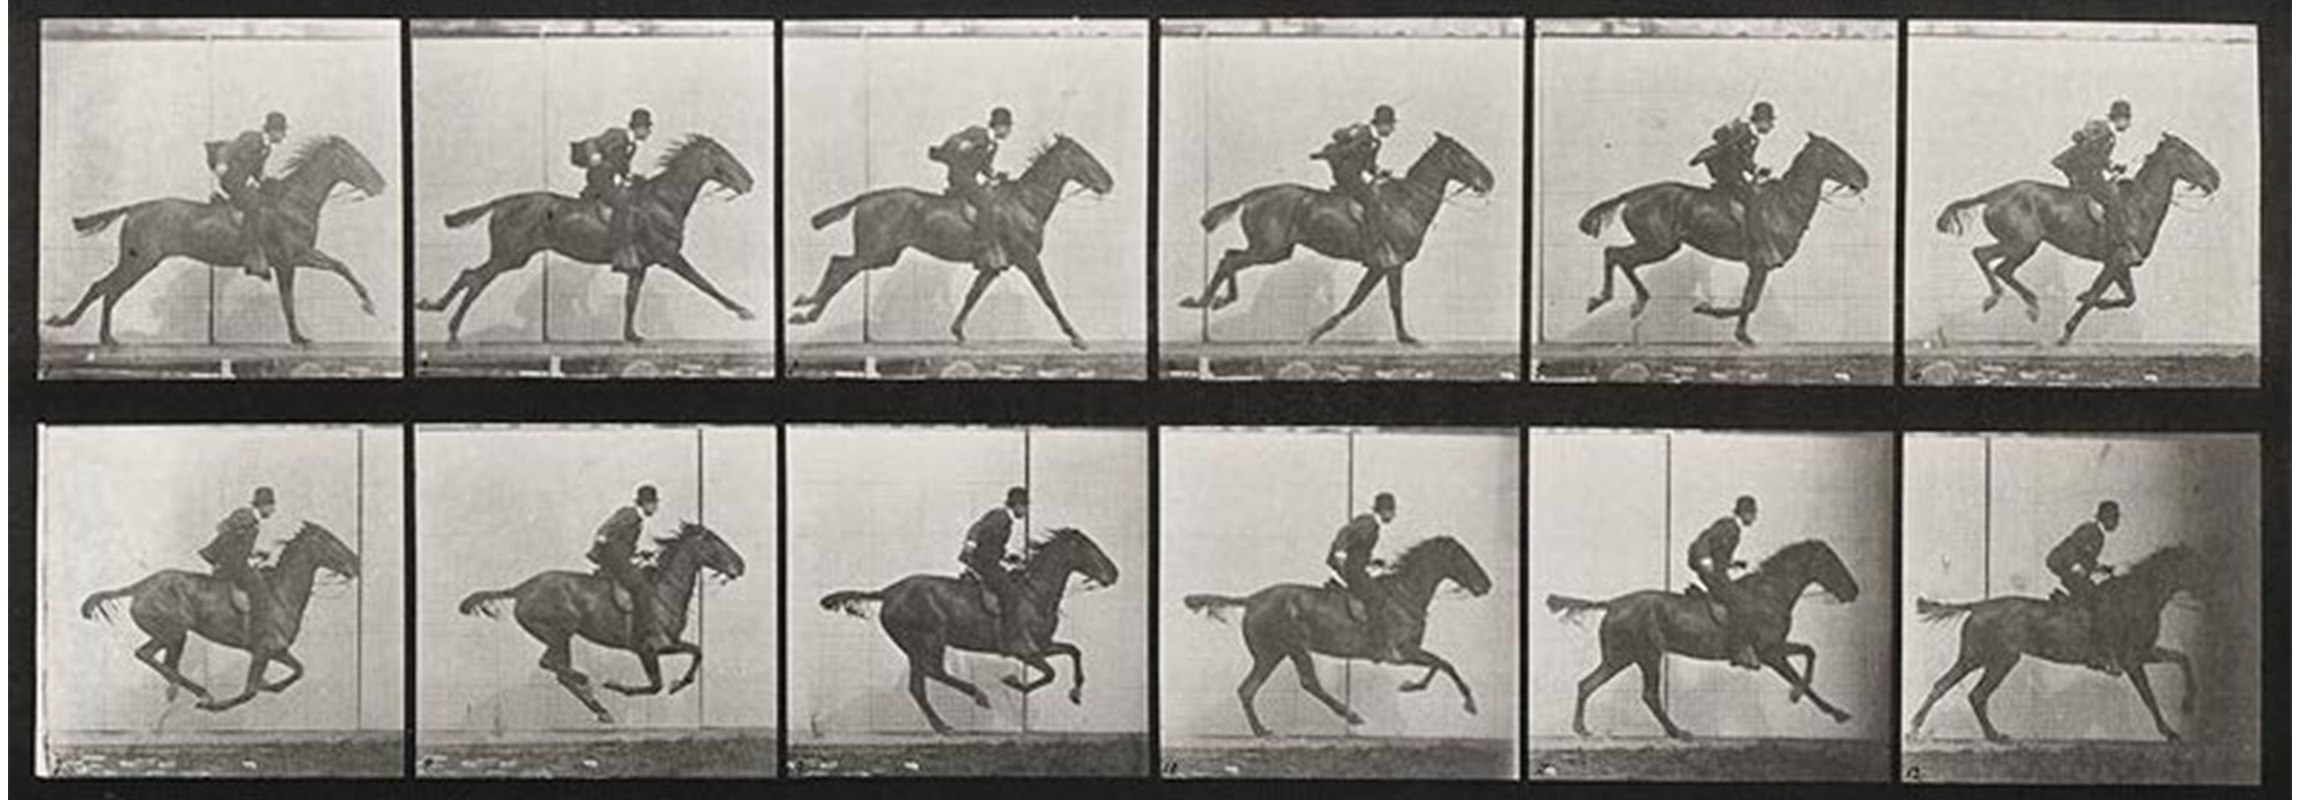 two rows of images of man riding horse; each image is at a slightly different stage in the horse's run